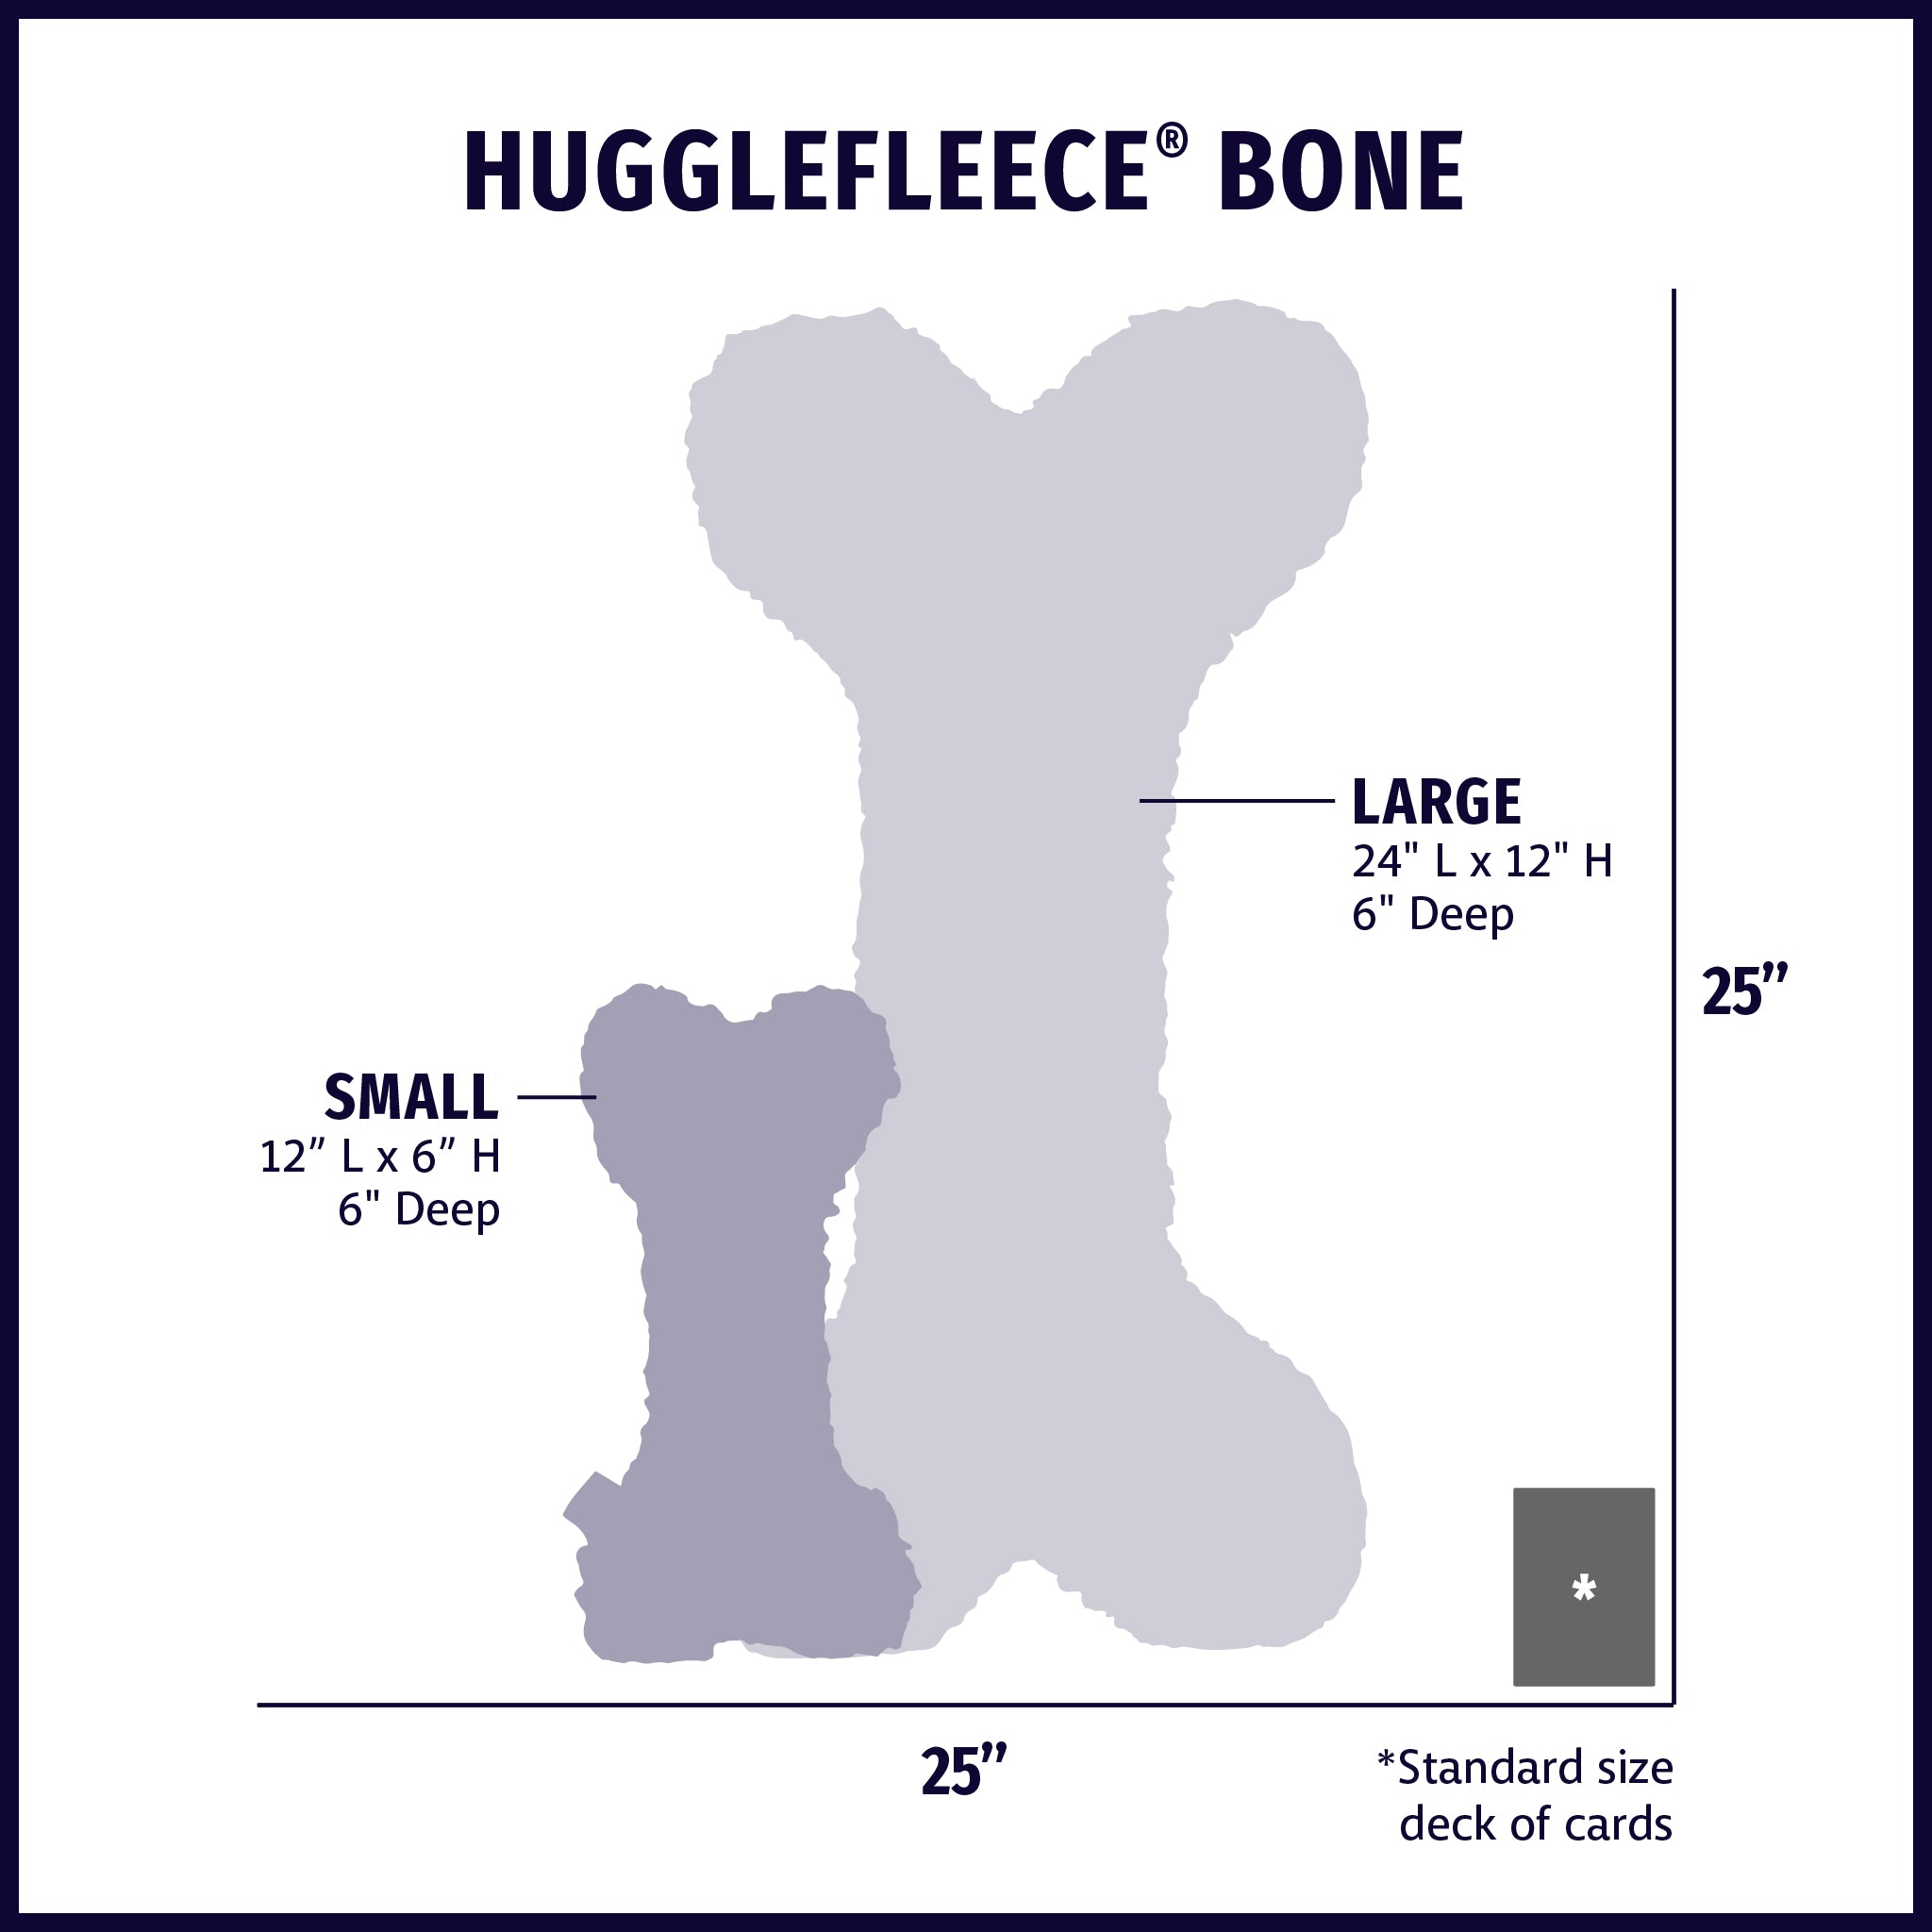 Size chart displaying HuggleFleece® Bones plush dog toys silhouettes in small and large with approximate dimensions of each size compared to standard size deck of cards.